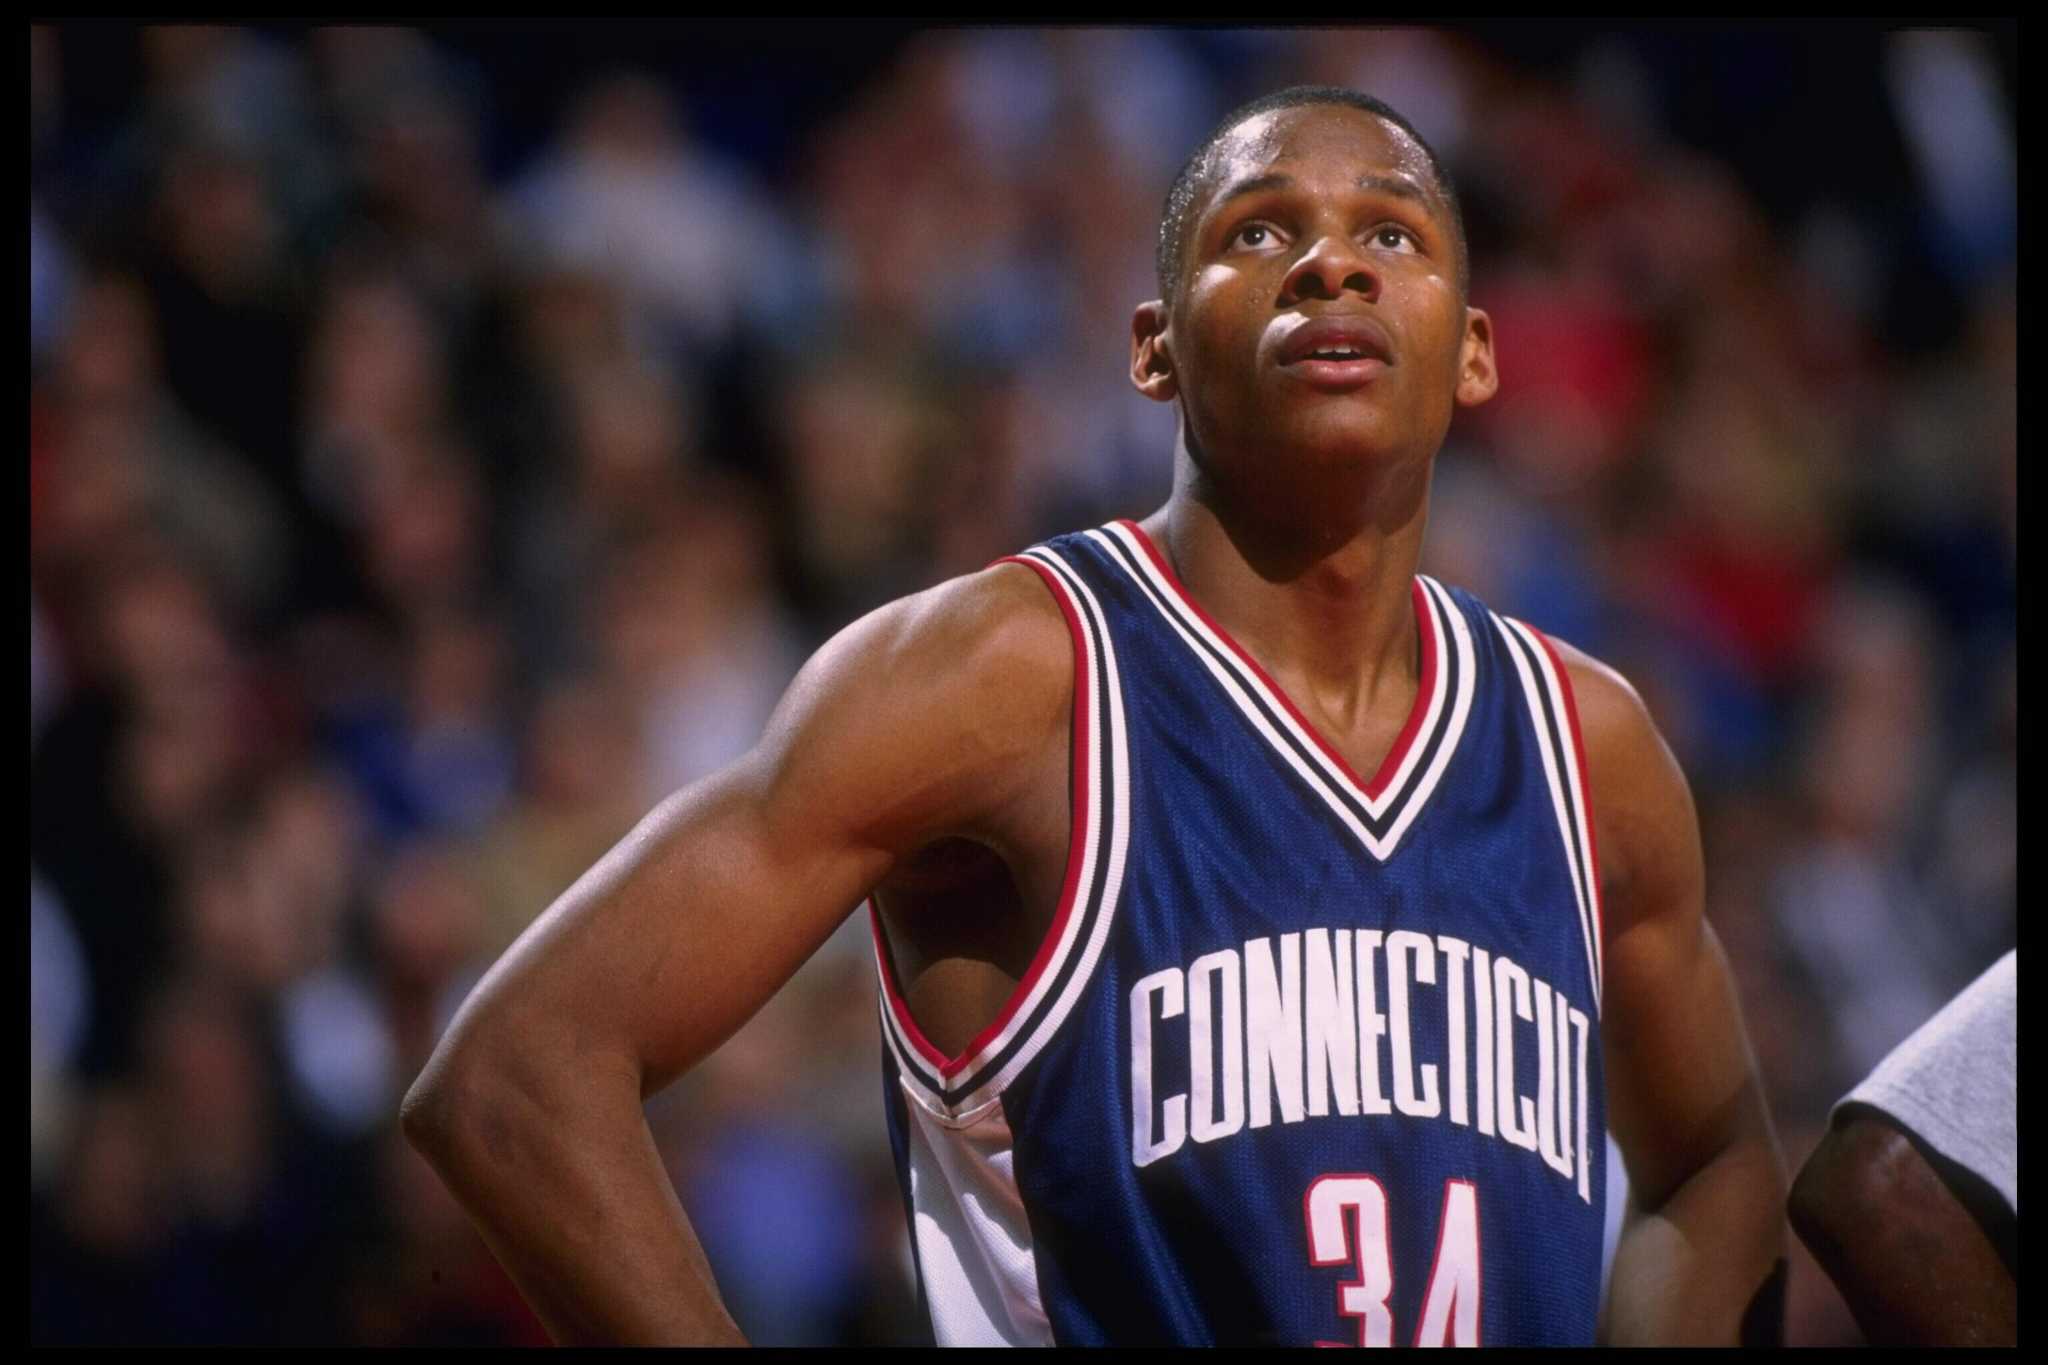 UConn honors Ray Allen with jersey retirement - ESPN Video